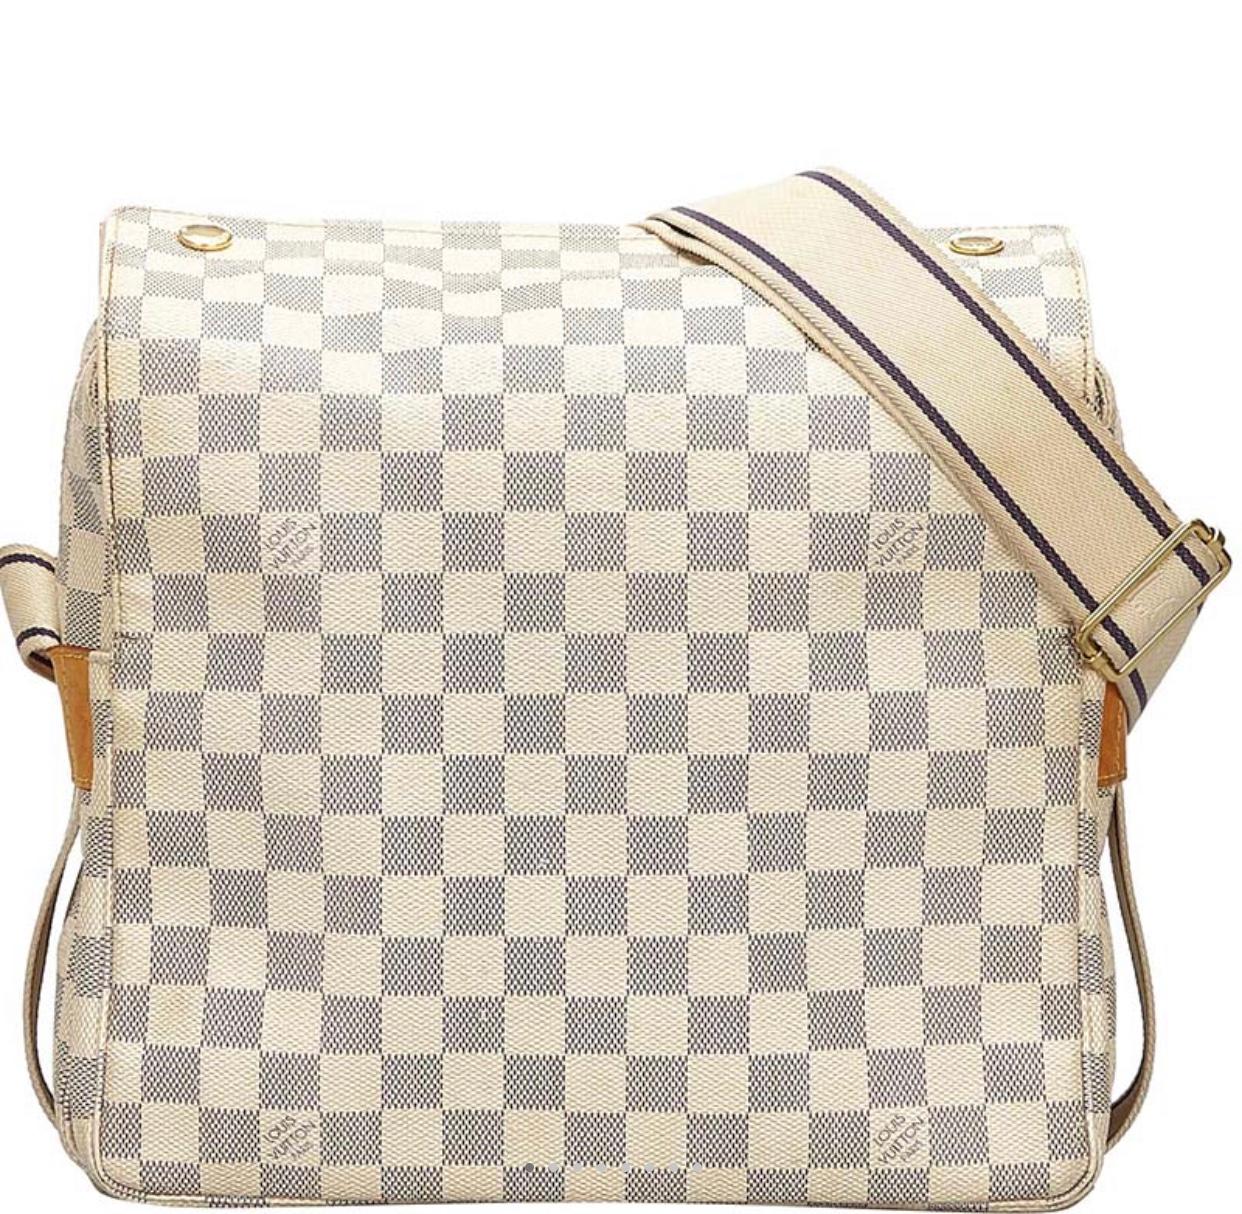 LOUIS VUITTON Naviglio Damier Azur shoulder bag PVC leather white, Cross Body In Excellent Condition In New York, NY